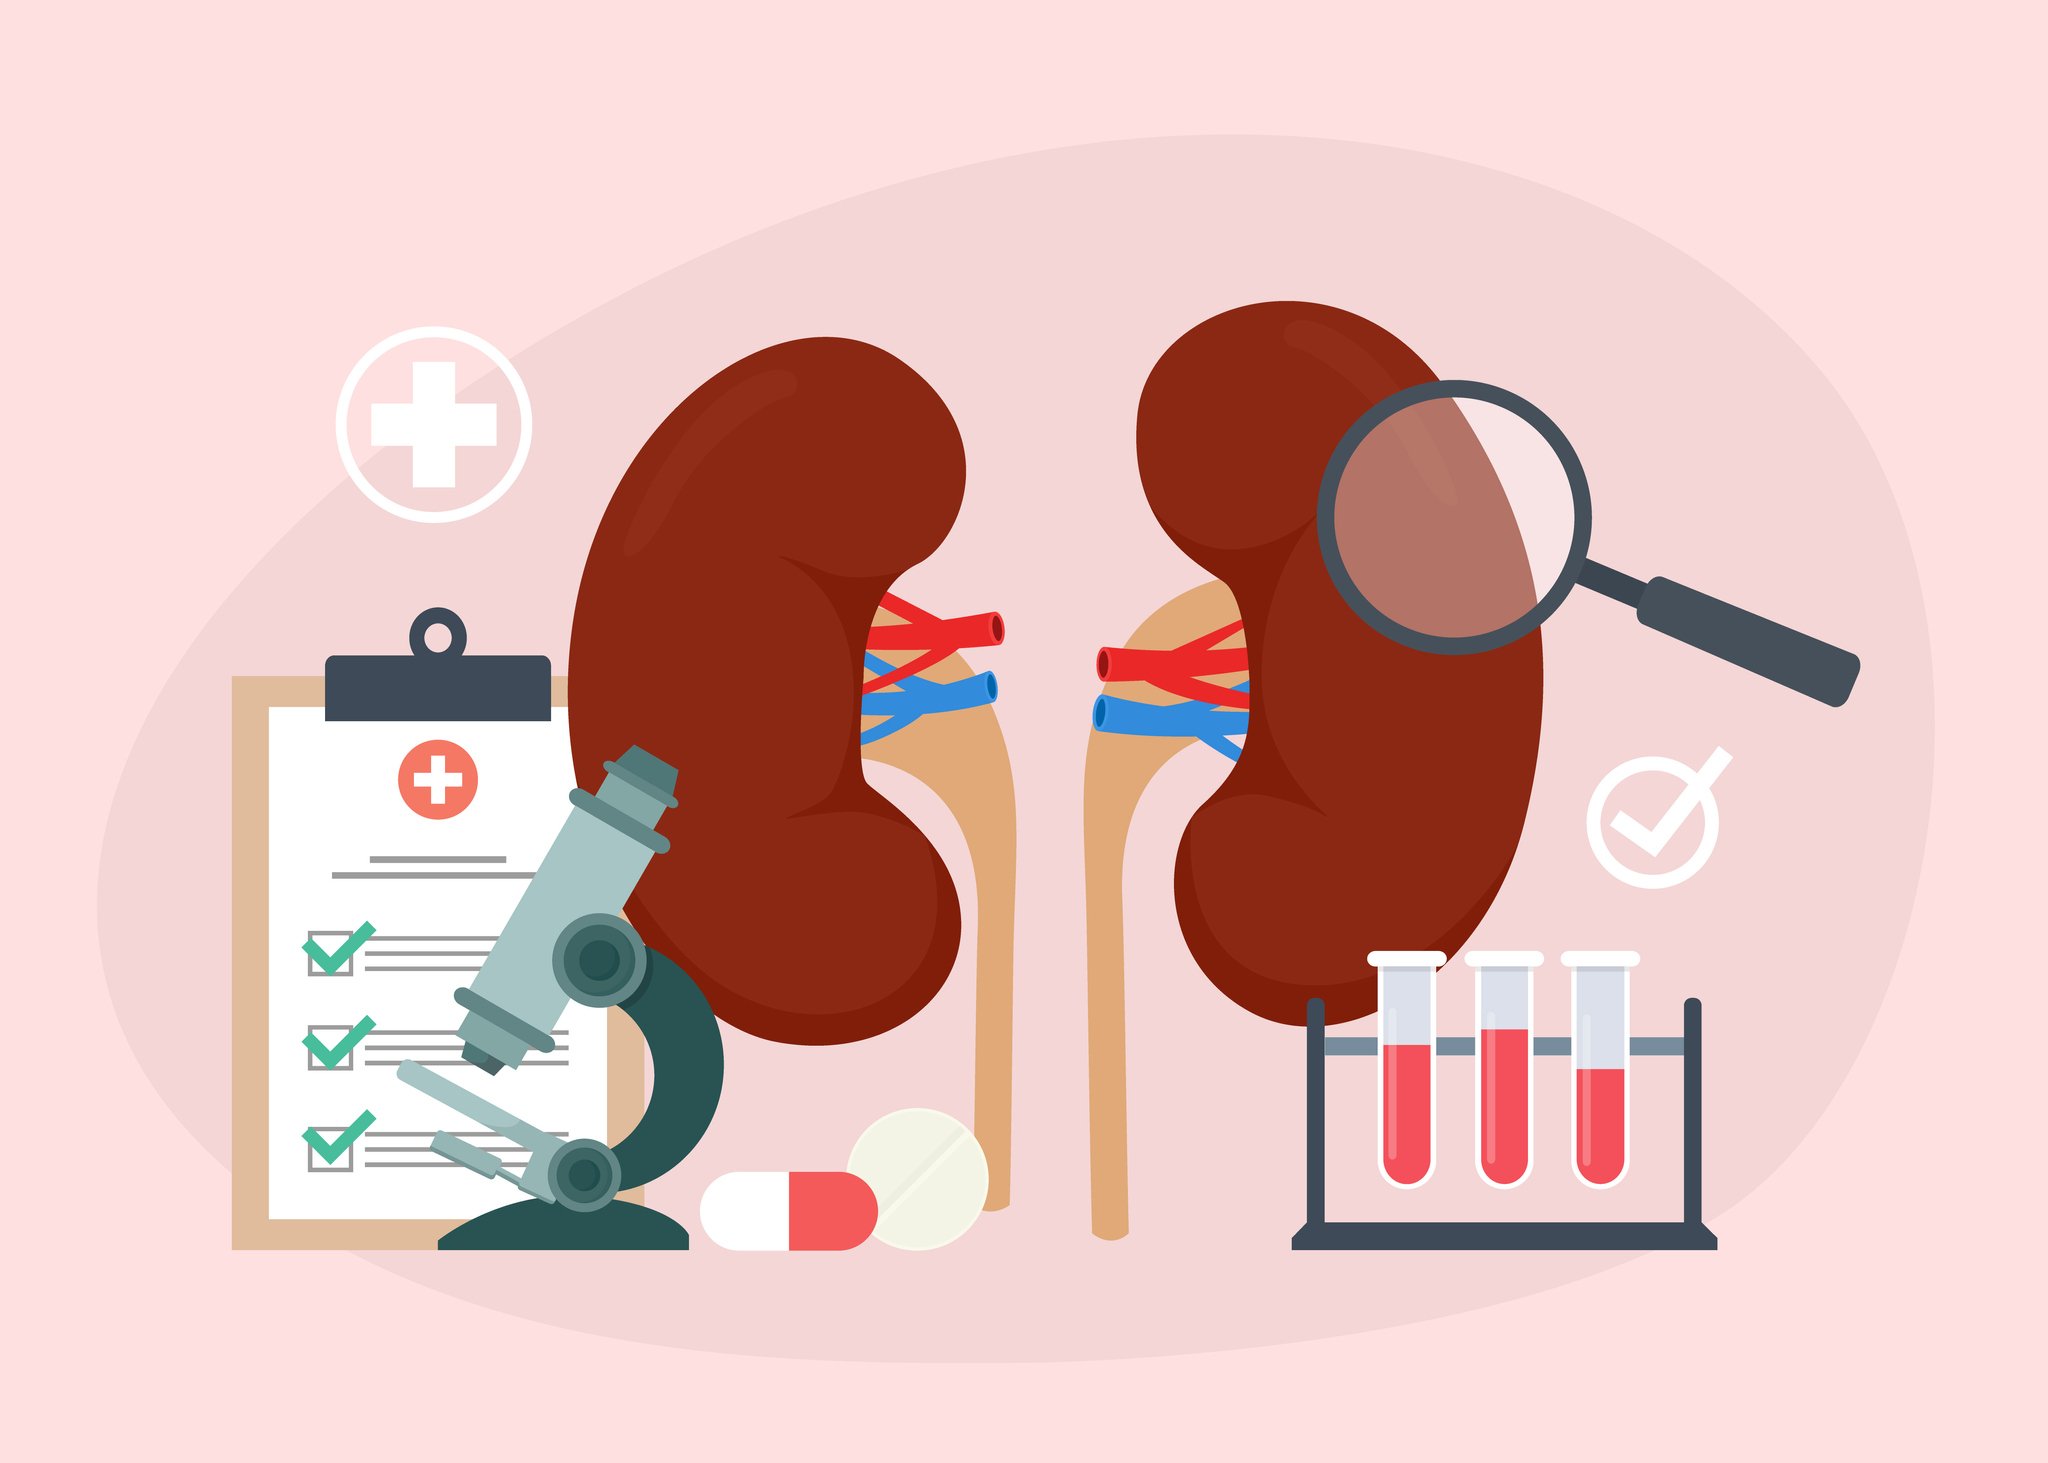 A pair of kidneys and diagnostic tools such as a microscope and beakers